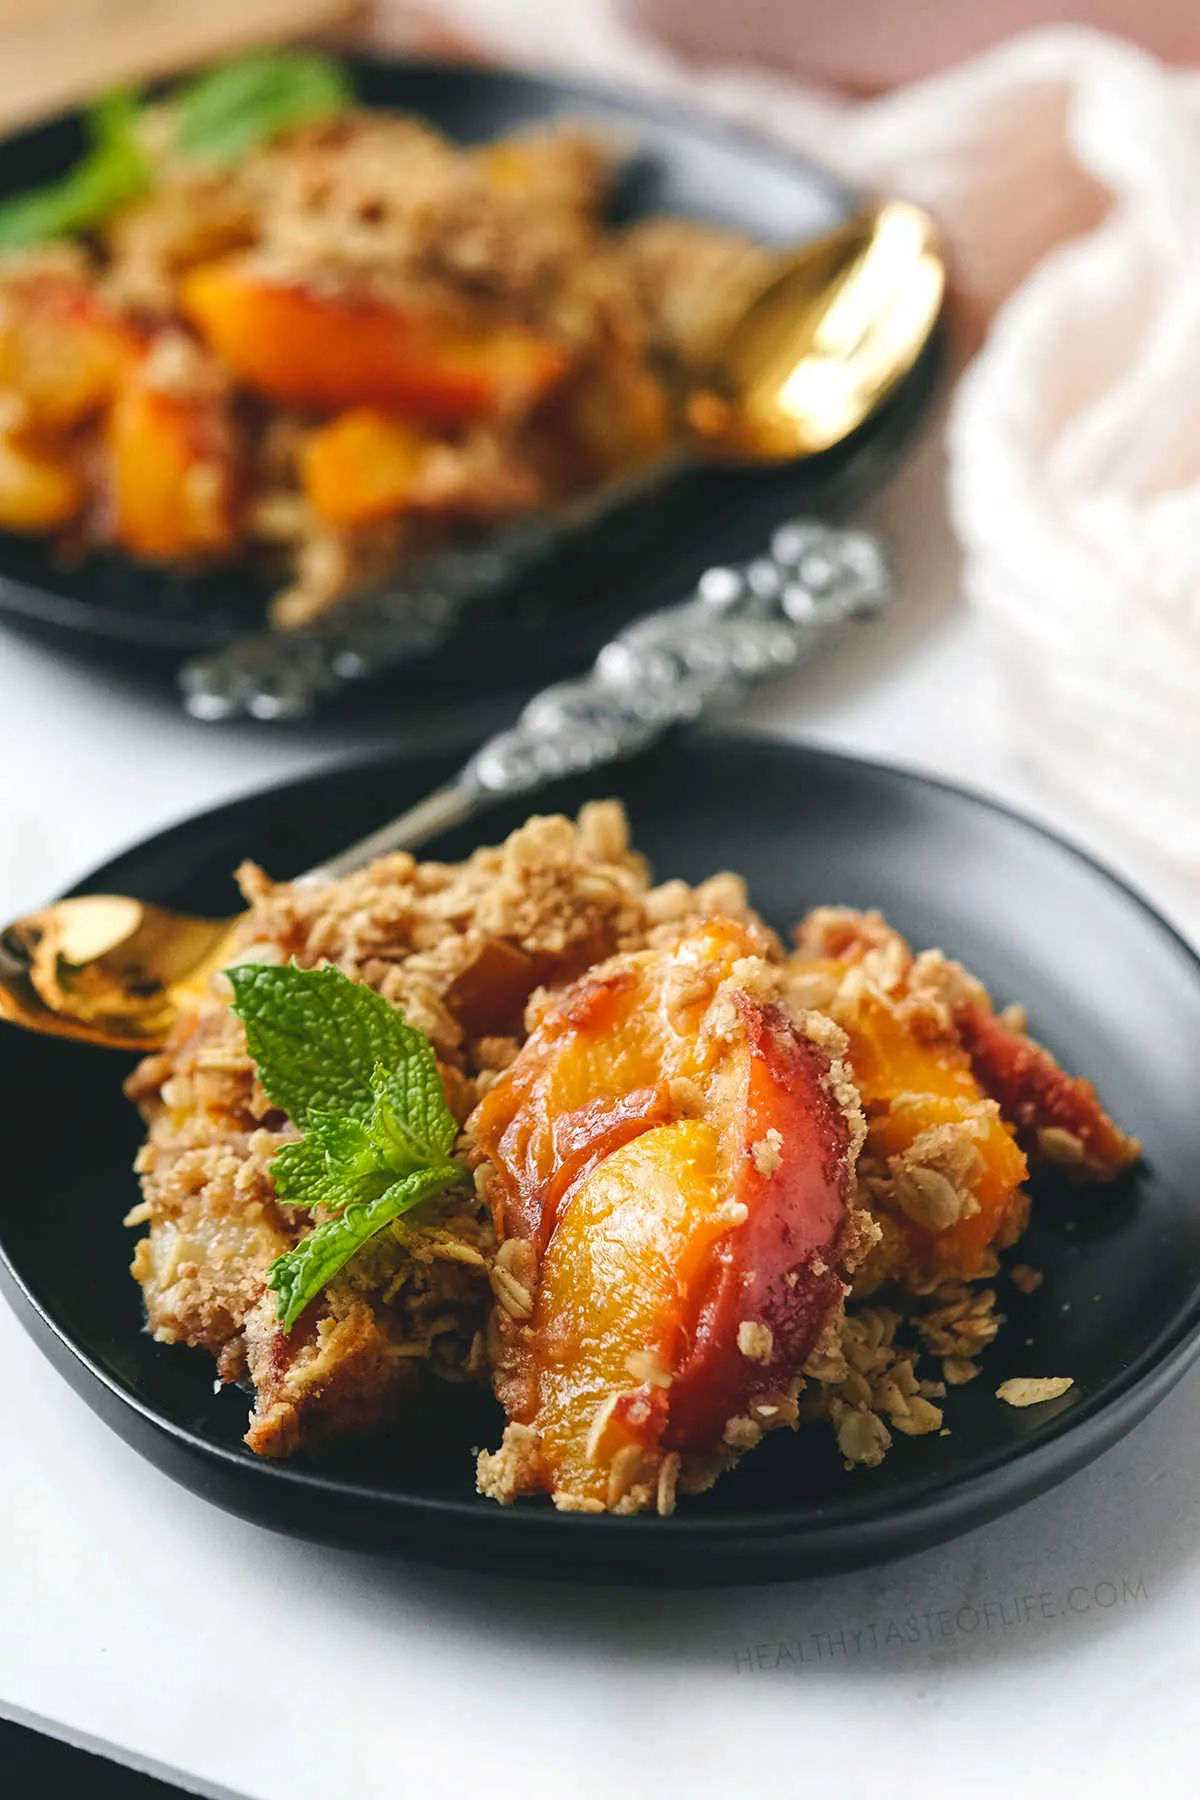 Peach crisp or crumble with oats.